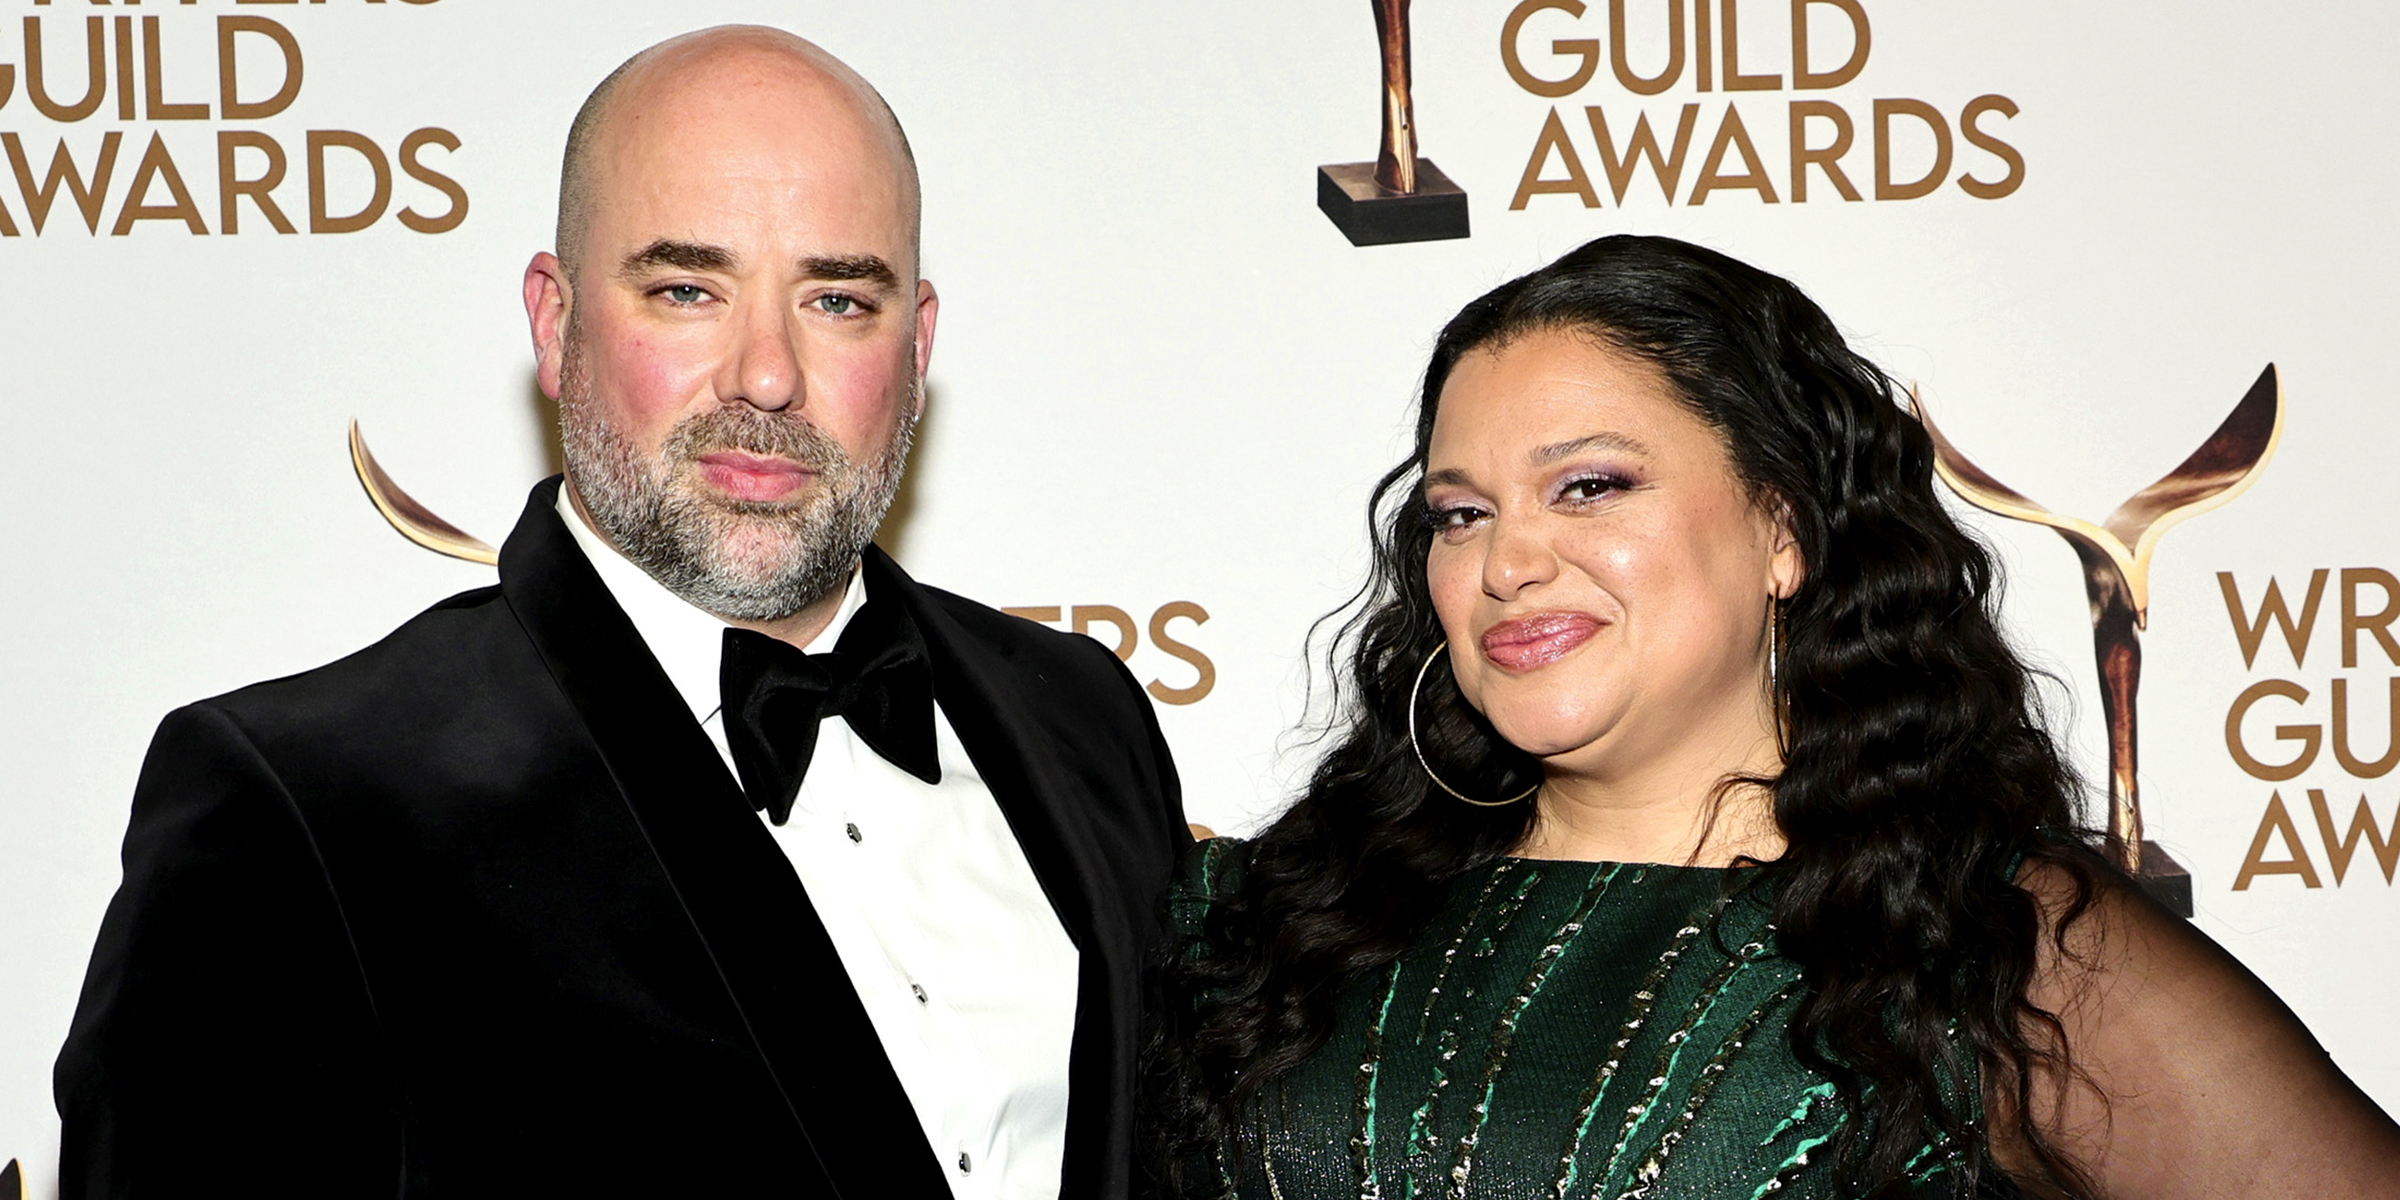 Gijs van der Most and Michelle Buteau | Source: Getty Images